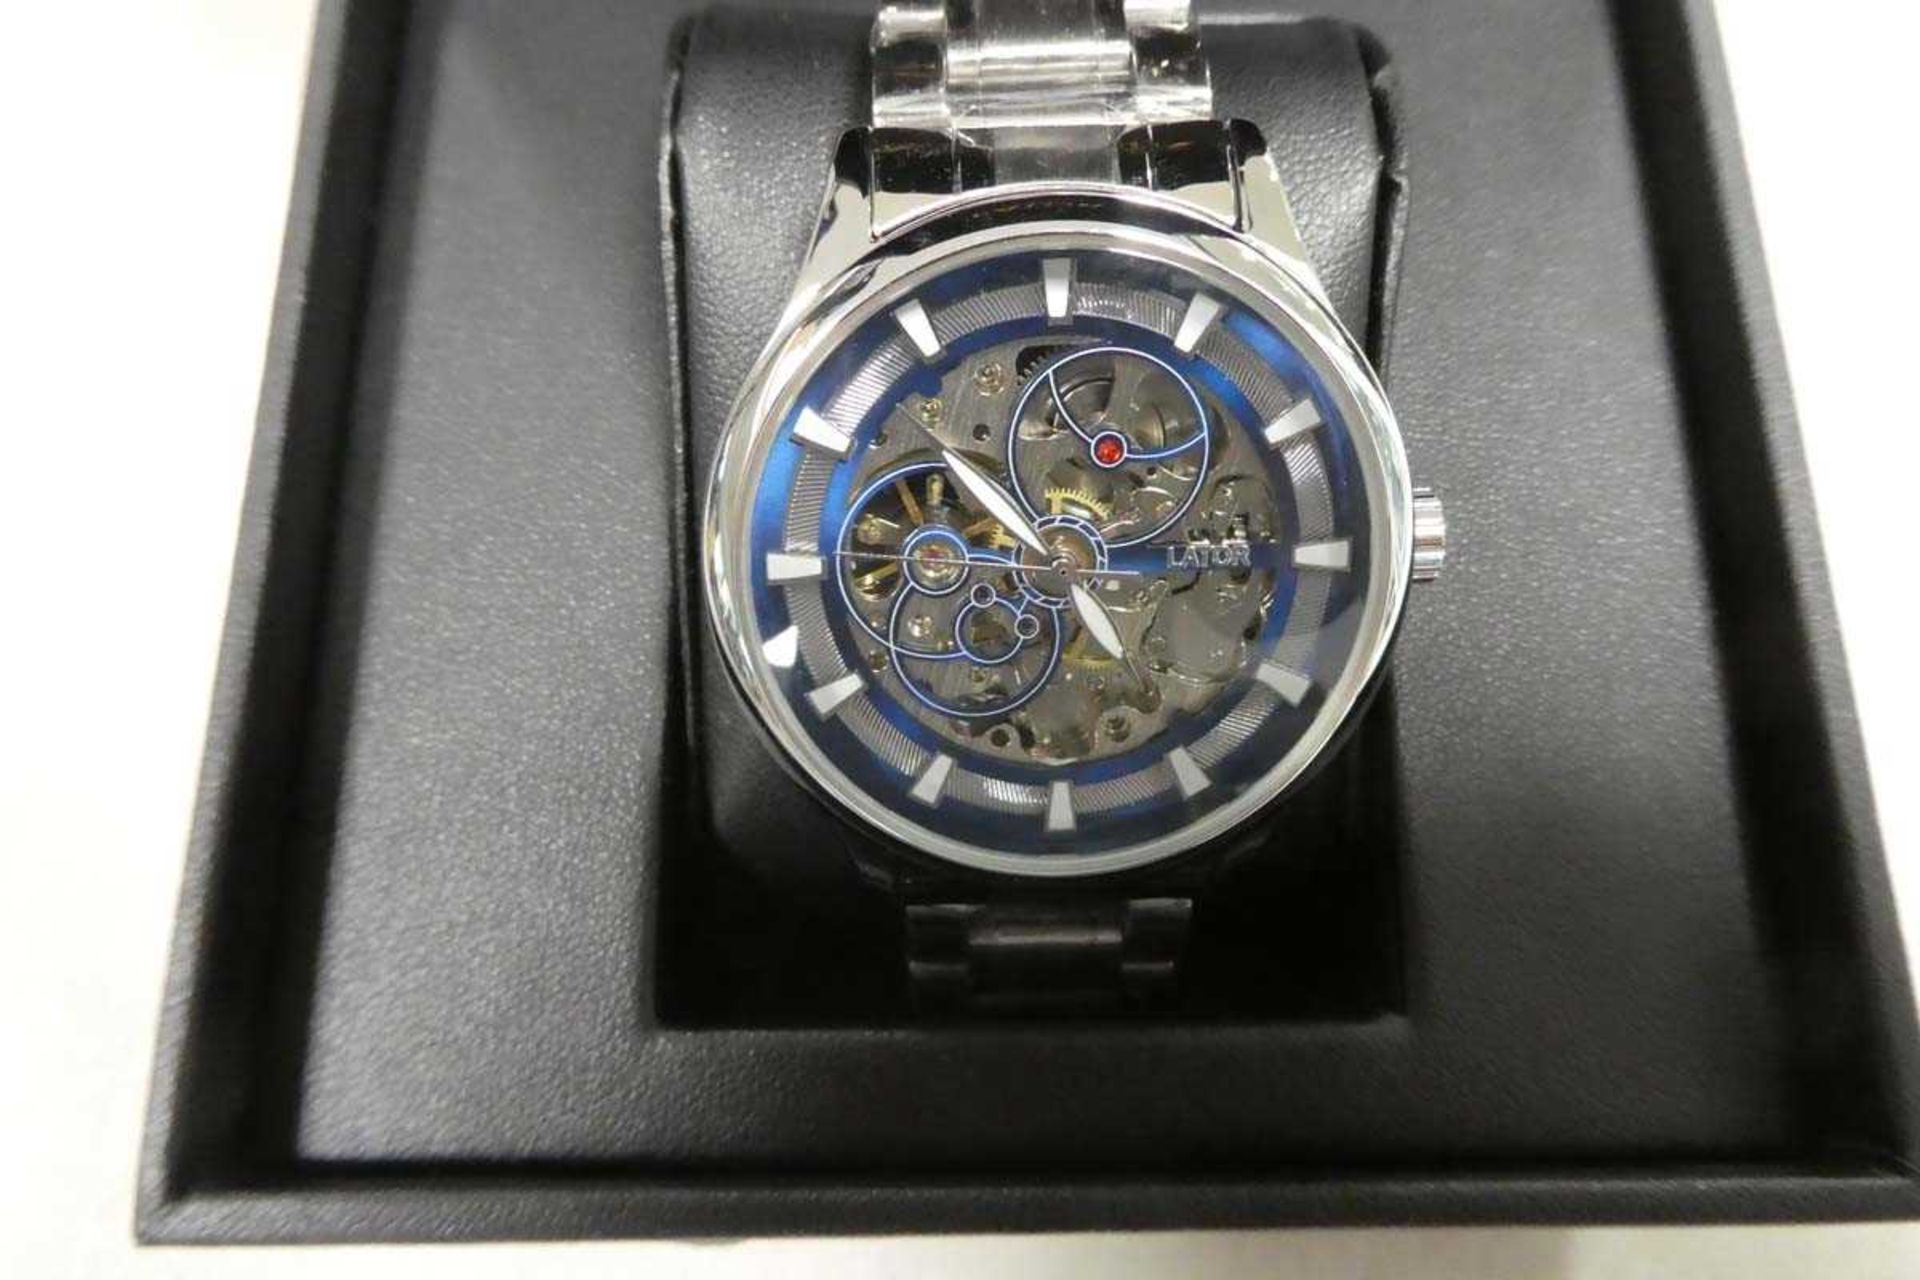 +VAT Lator Calibre automatic chronograph dial wristwatch mode L7280 with box - Image 2 of 2